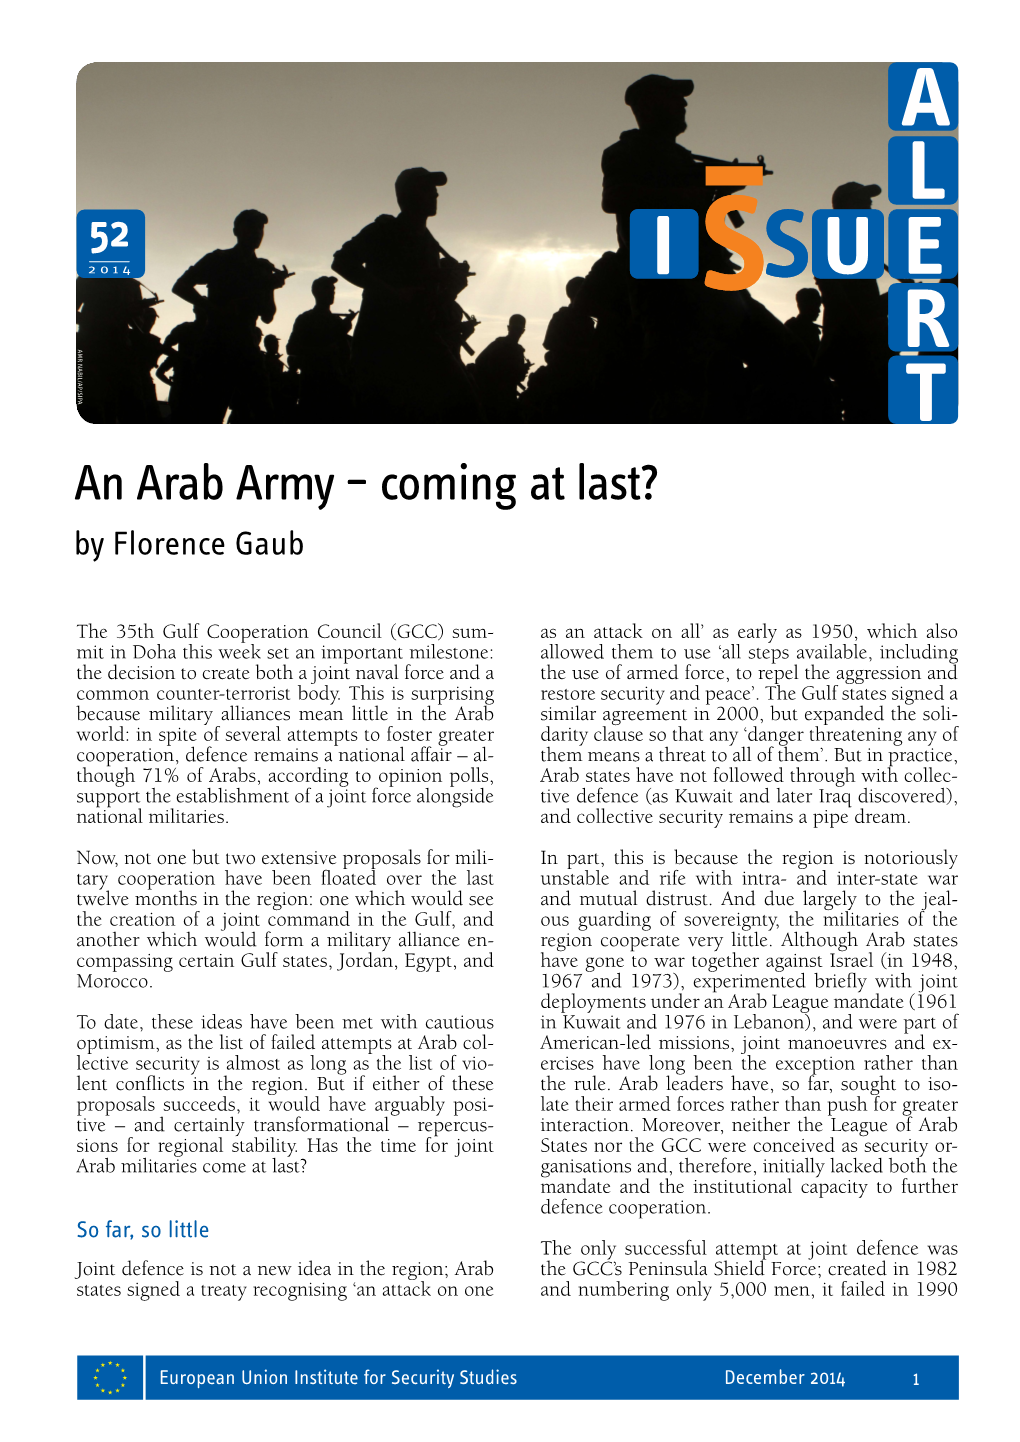 An Arab Army – Coming at Last? by Florence Gaub